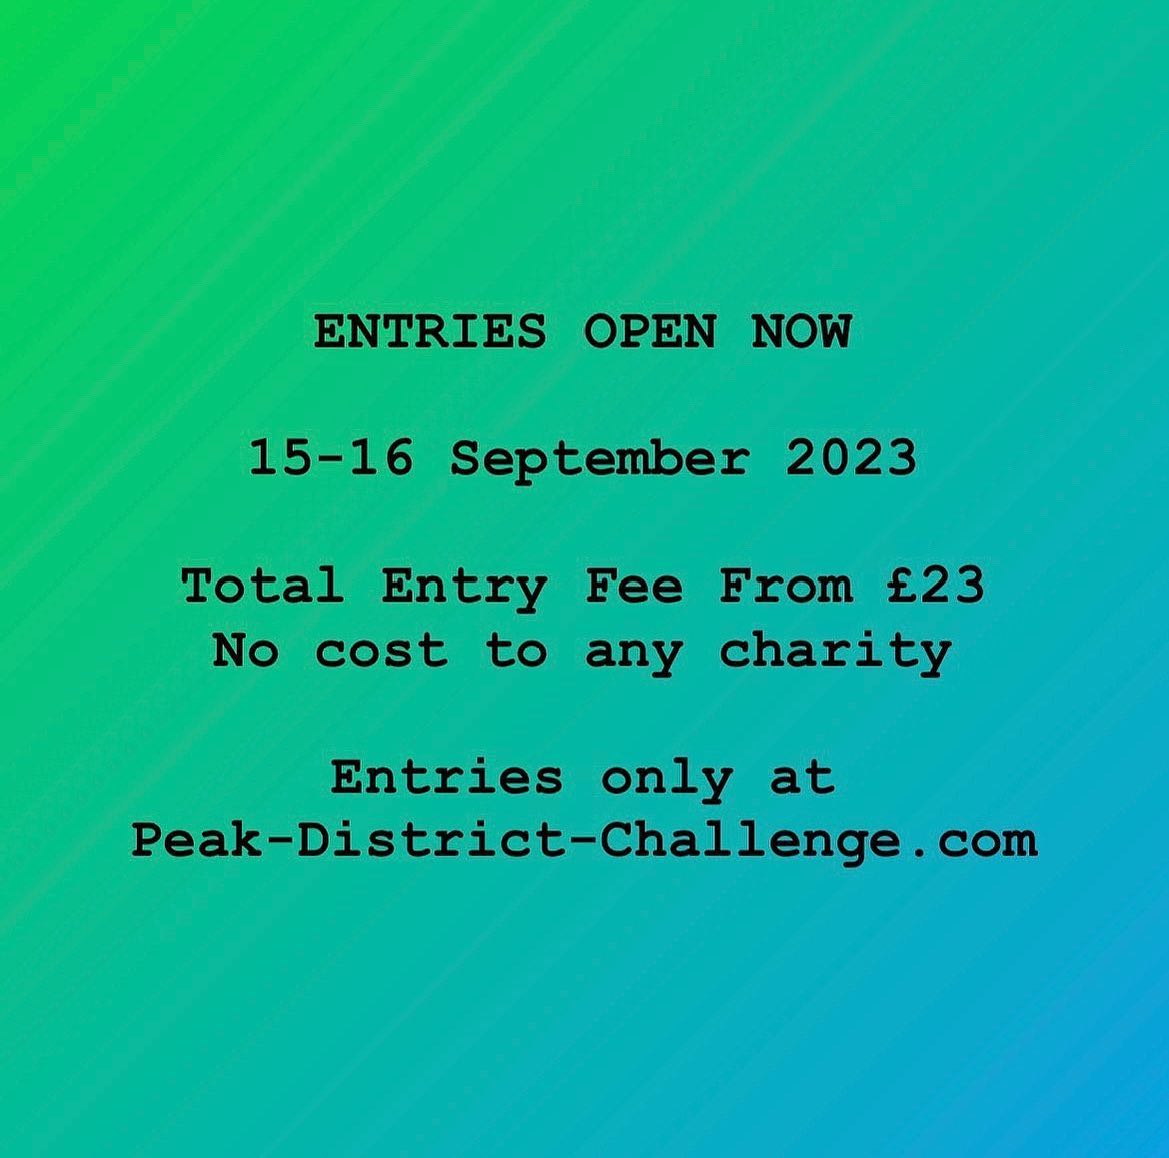 Peak-District-Challenge.com registrations are open with total entry fees from just £23!

Beat you...